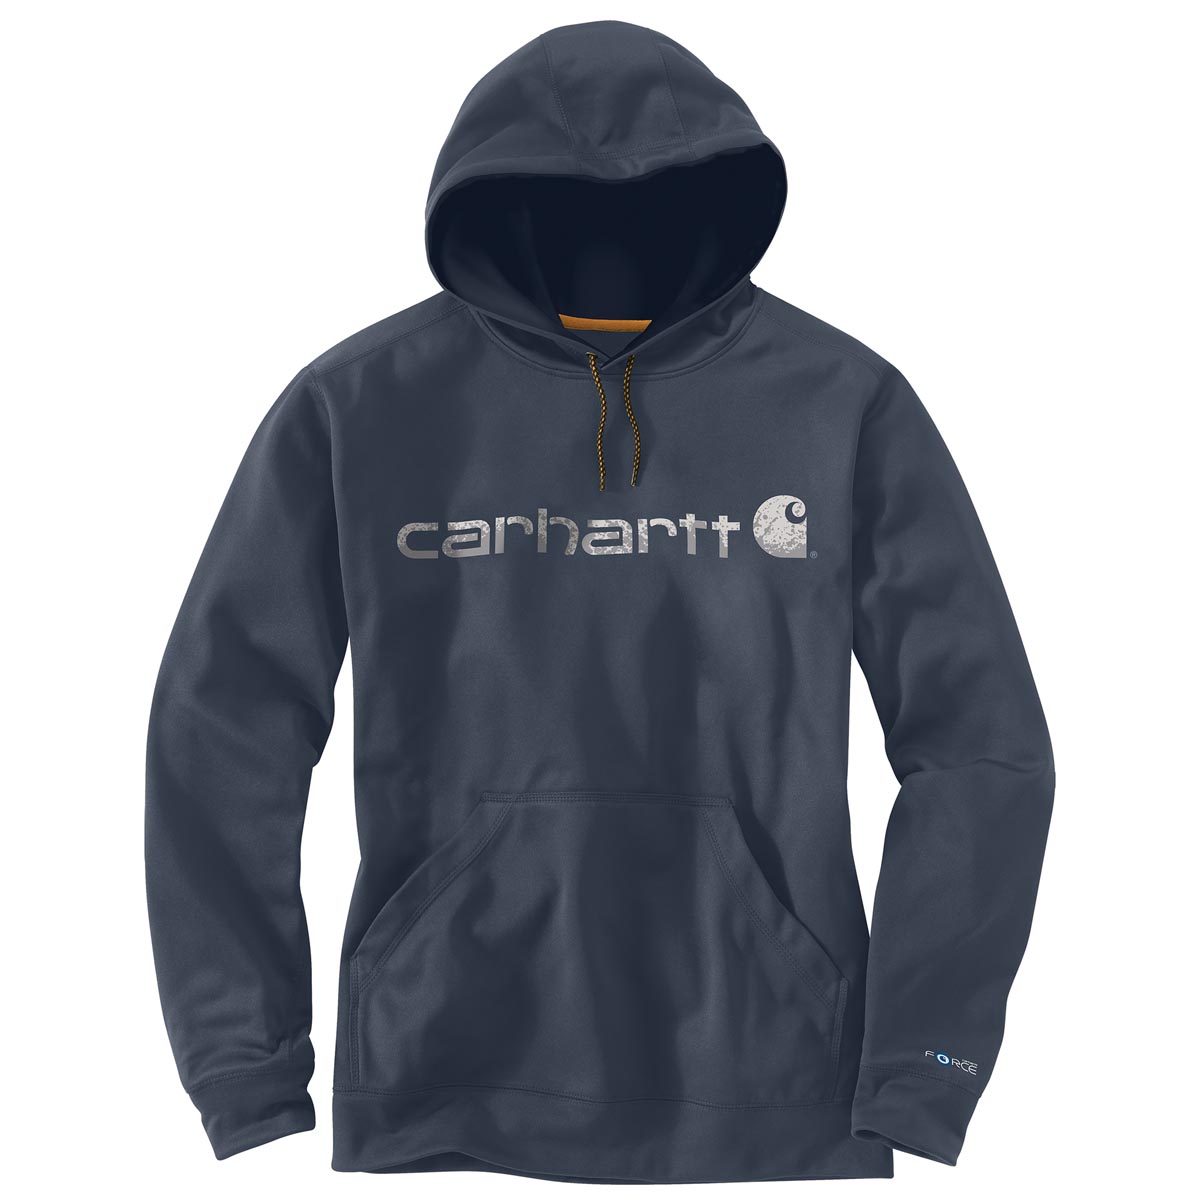 Carhartt Mens Force Extremes Signature Graphic Hooded Sweatshirt Discontinued Pricing